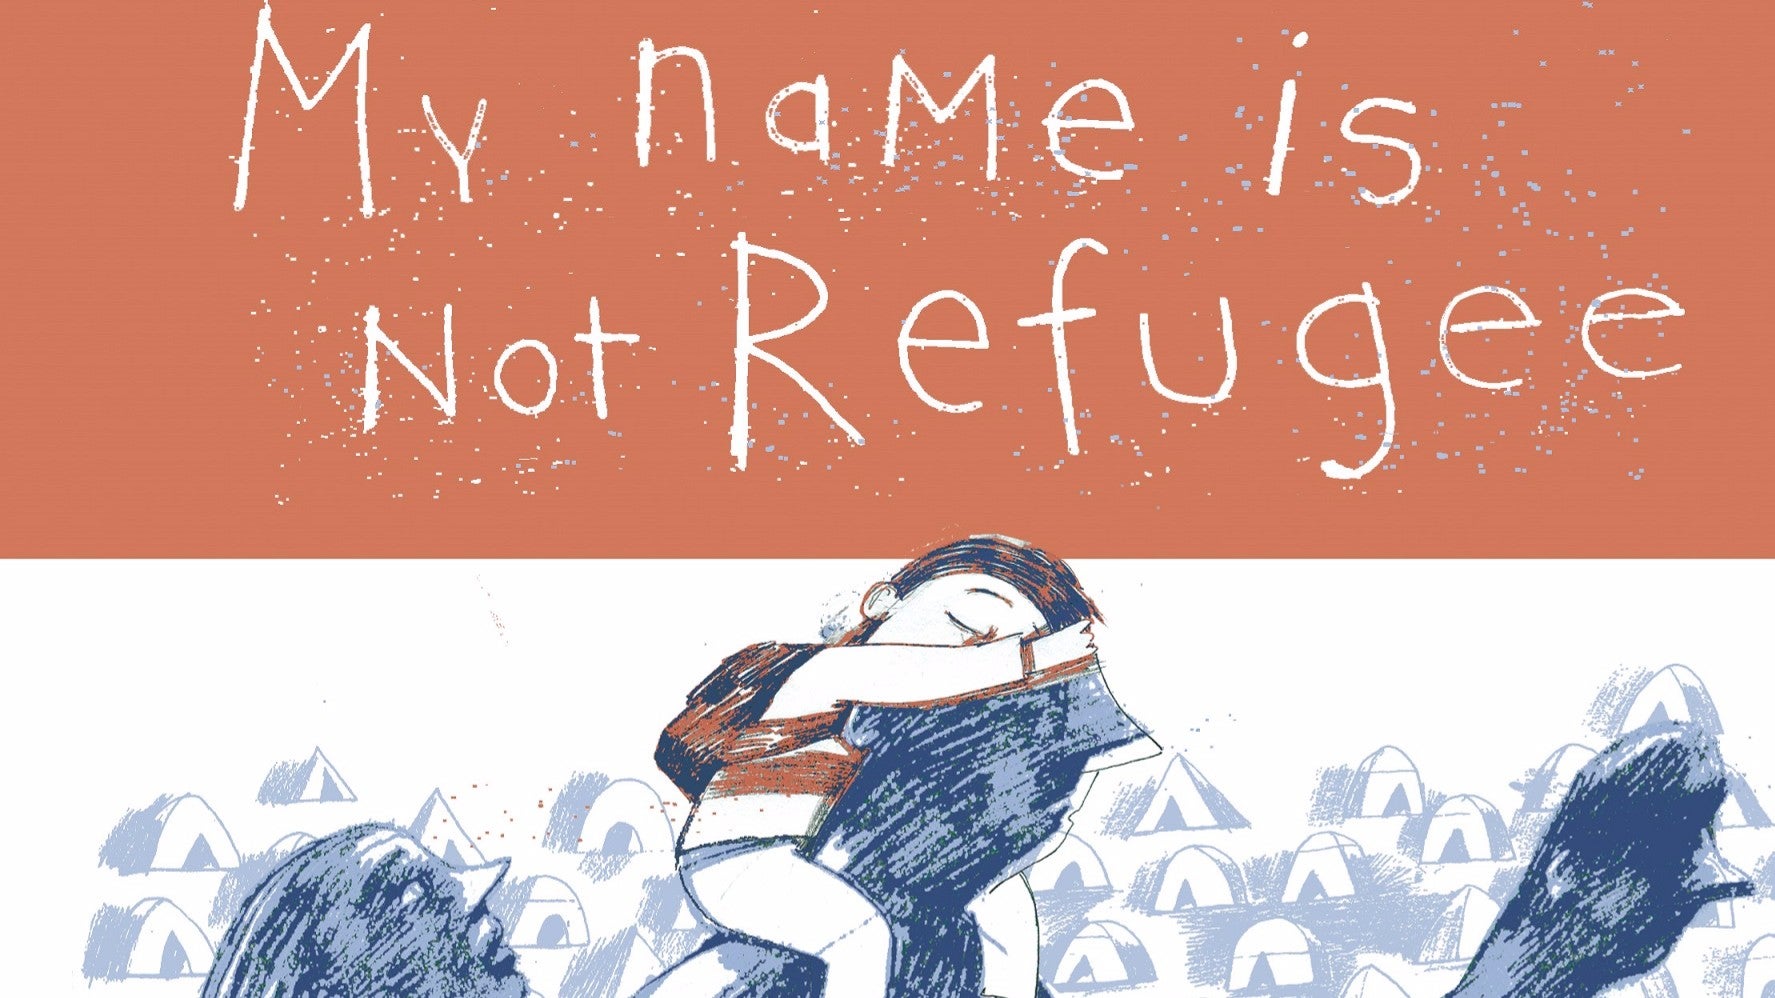 The cover of the award-winning book, pictured, which aims to get young children throughout Europe to think about the refugee crisis